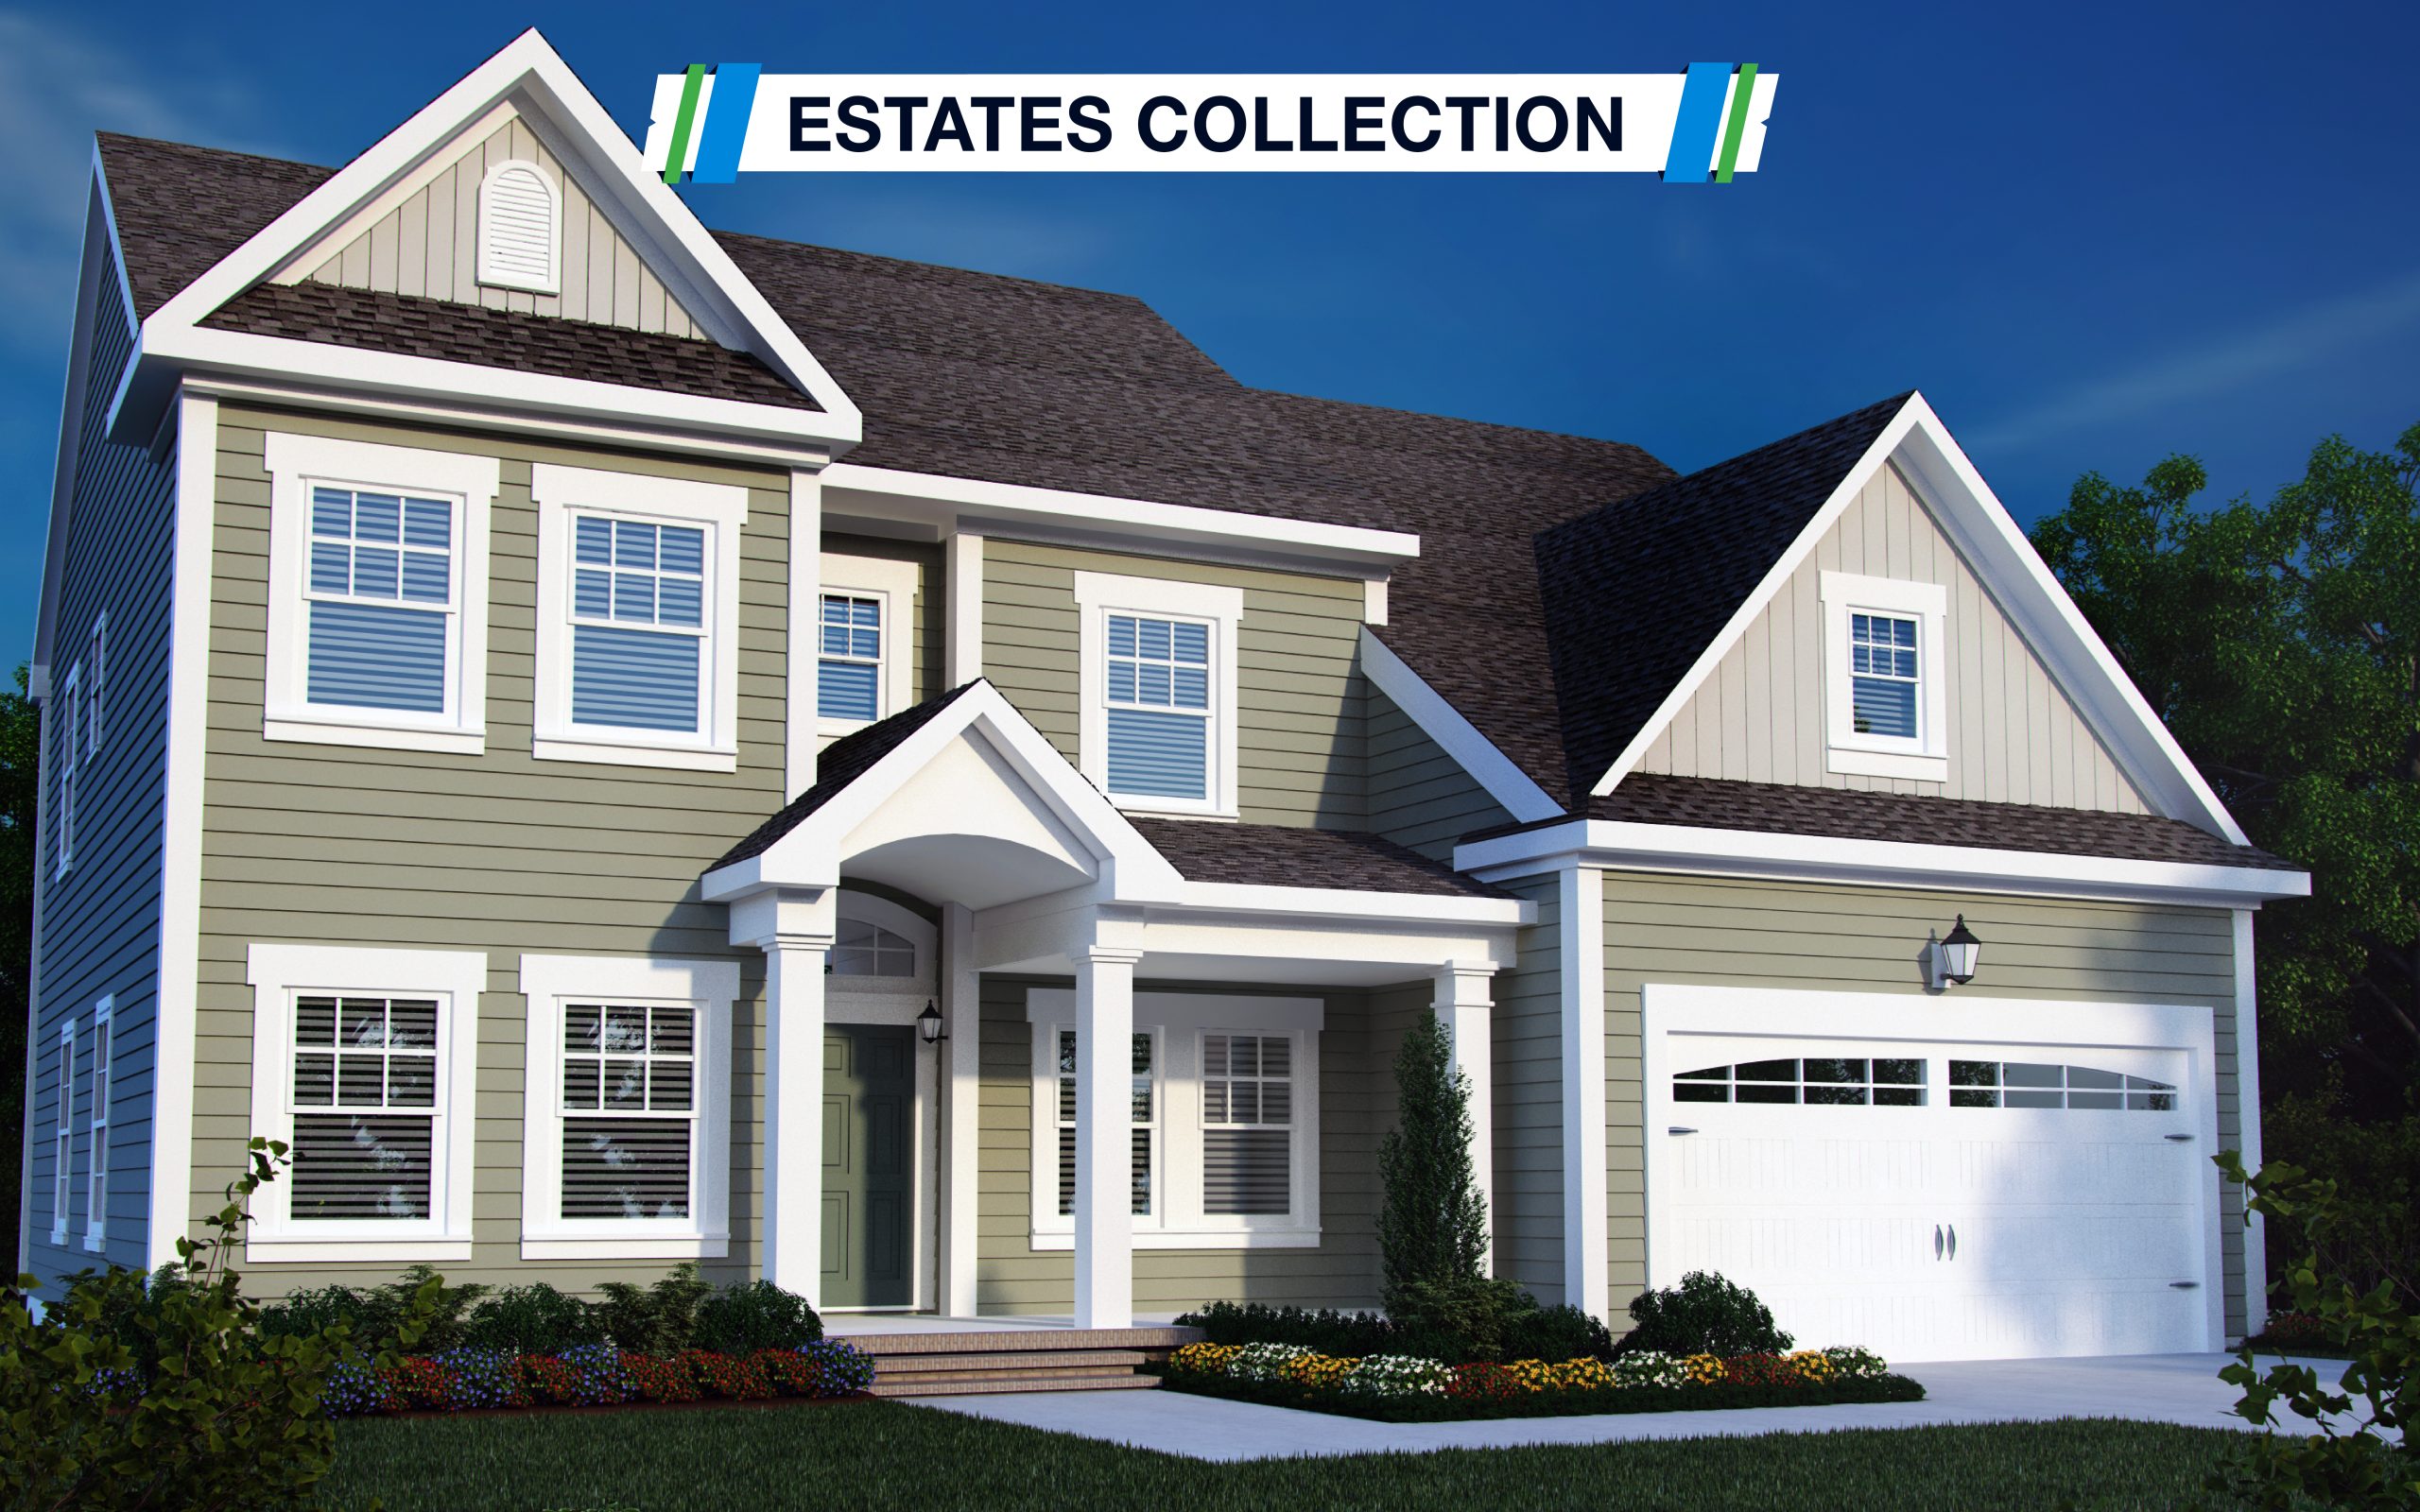 Front view of the Waterford Model - the Estates Collection. Home is two stories and light green with white trim. Image show the 2 car garage, front porch and nine front windows.